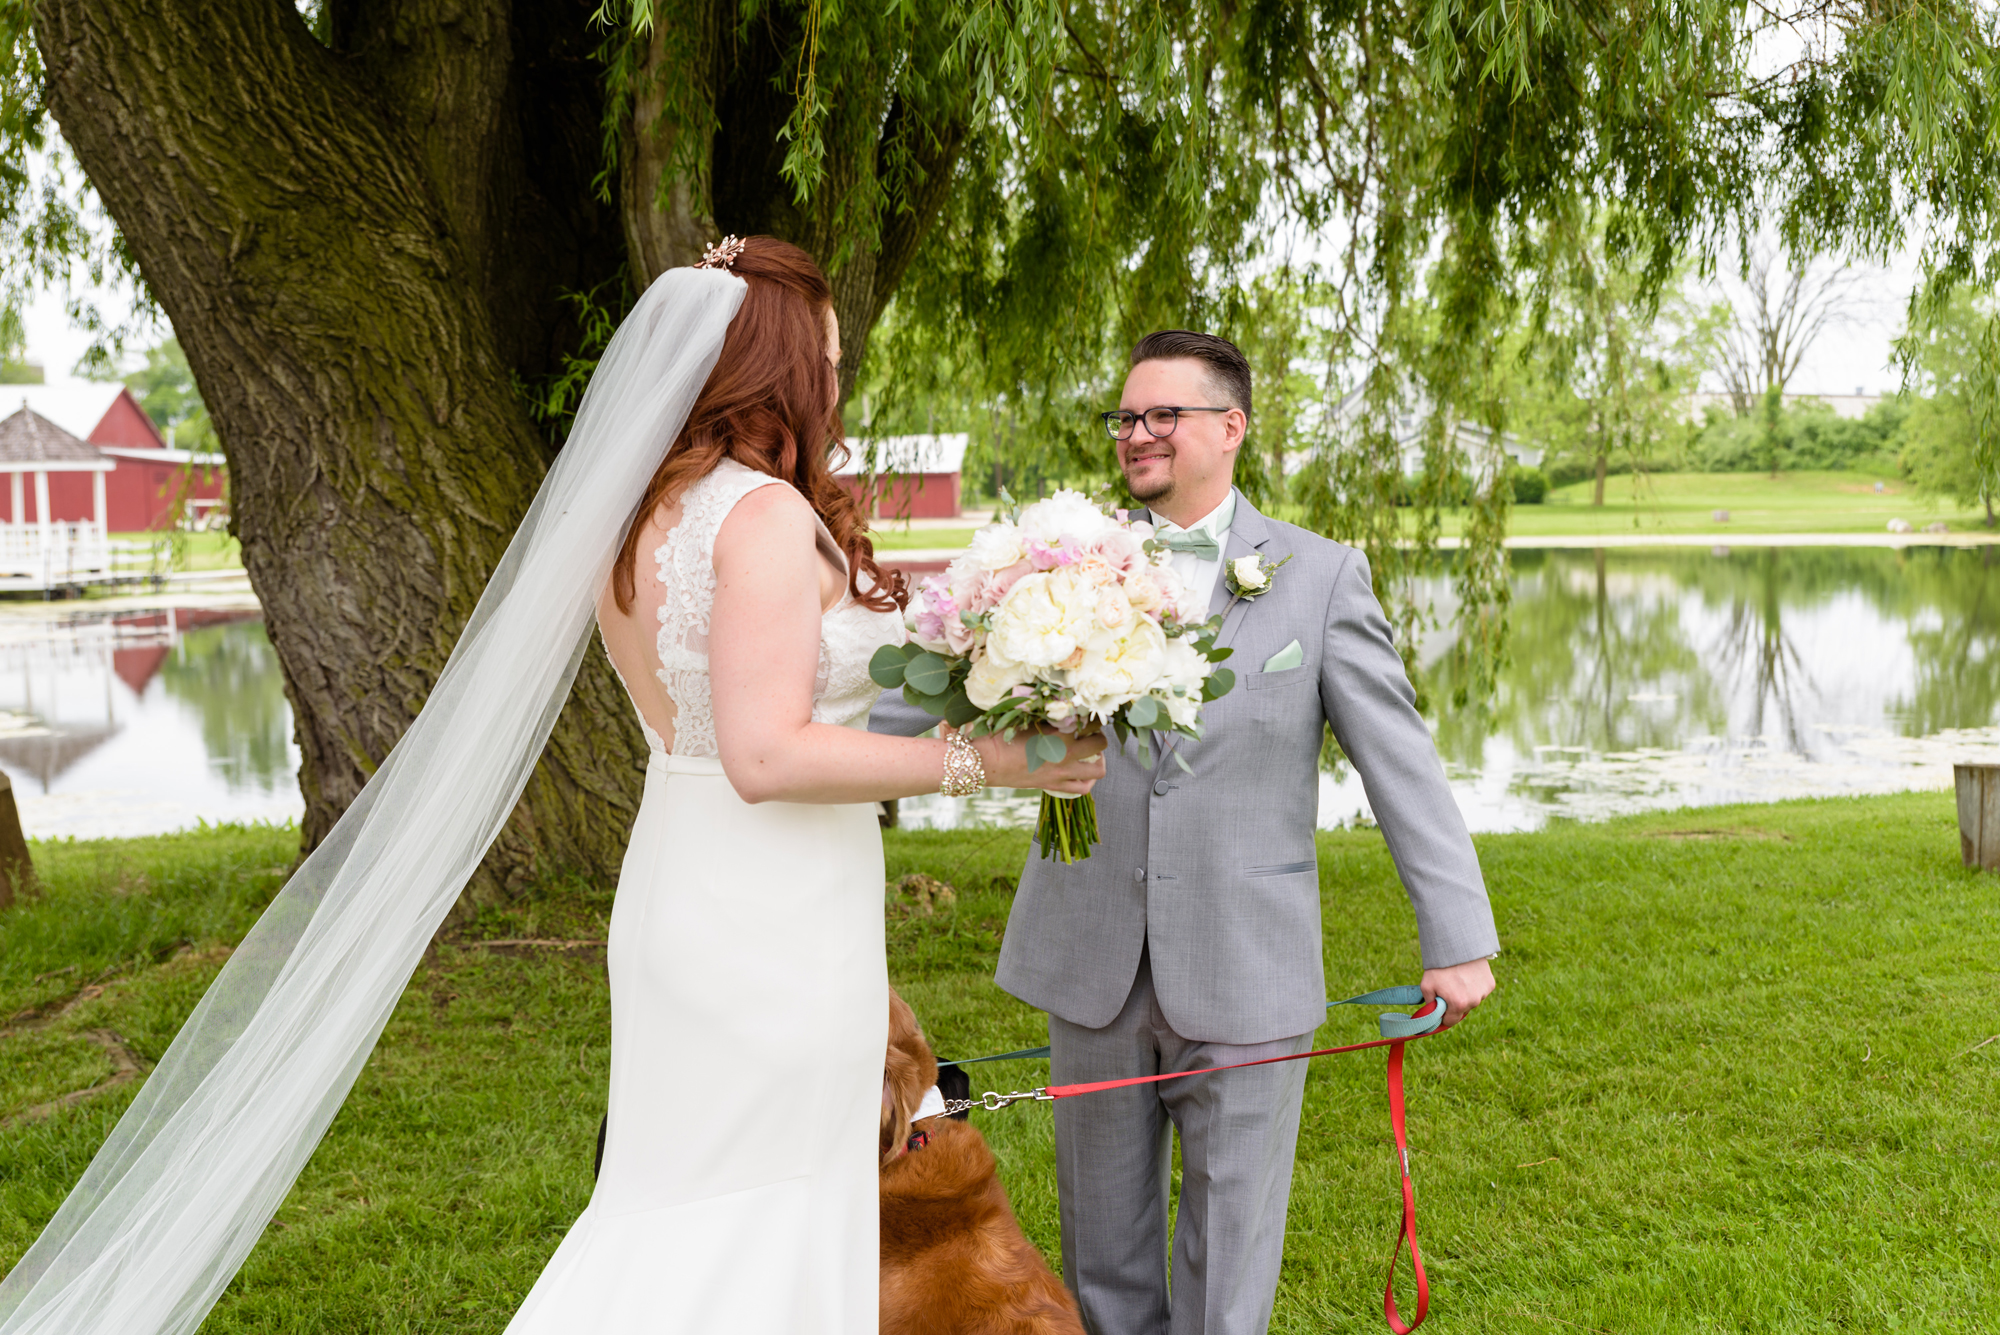 Bride & Groom do a first look with their dogs before their wedding at Amish Acres